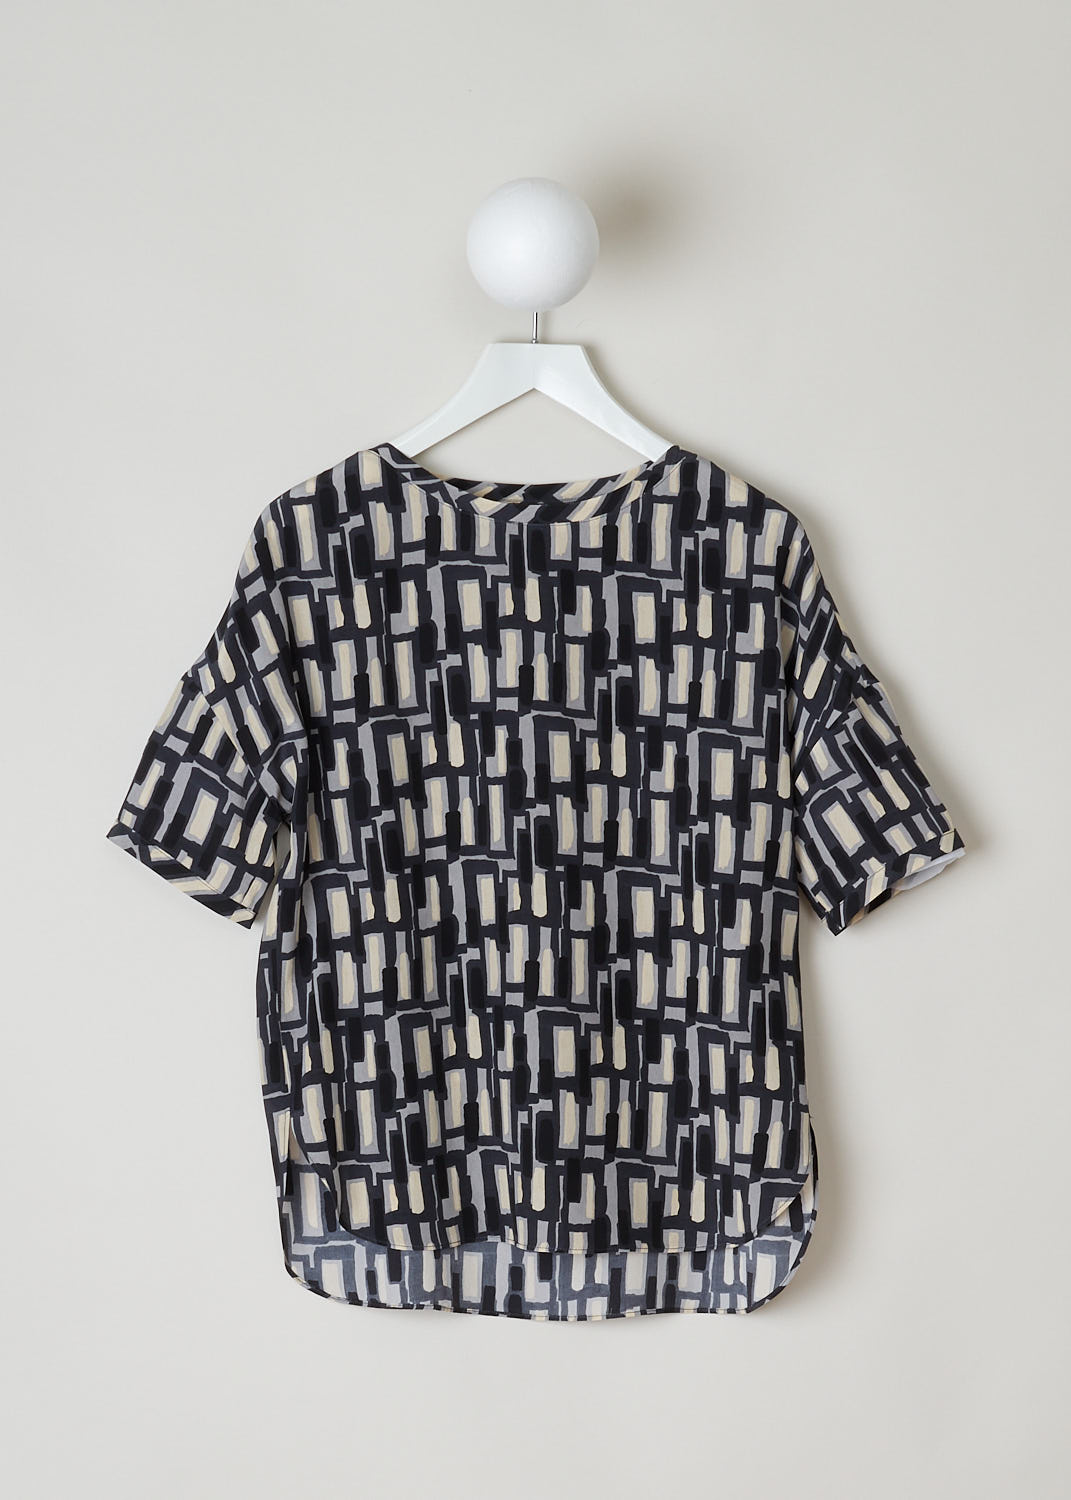 ASPESI, SILK PRINTED TOP, 5618_V126_66173, Print, Front, This short sleeve top has a geometric print in black, grey and off-white hues. The top features a rounded neckline, an asymmetric finish with small slits on the sides and a rounded hemline.
